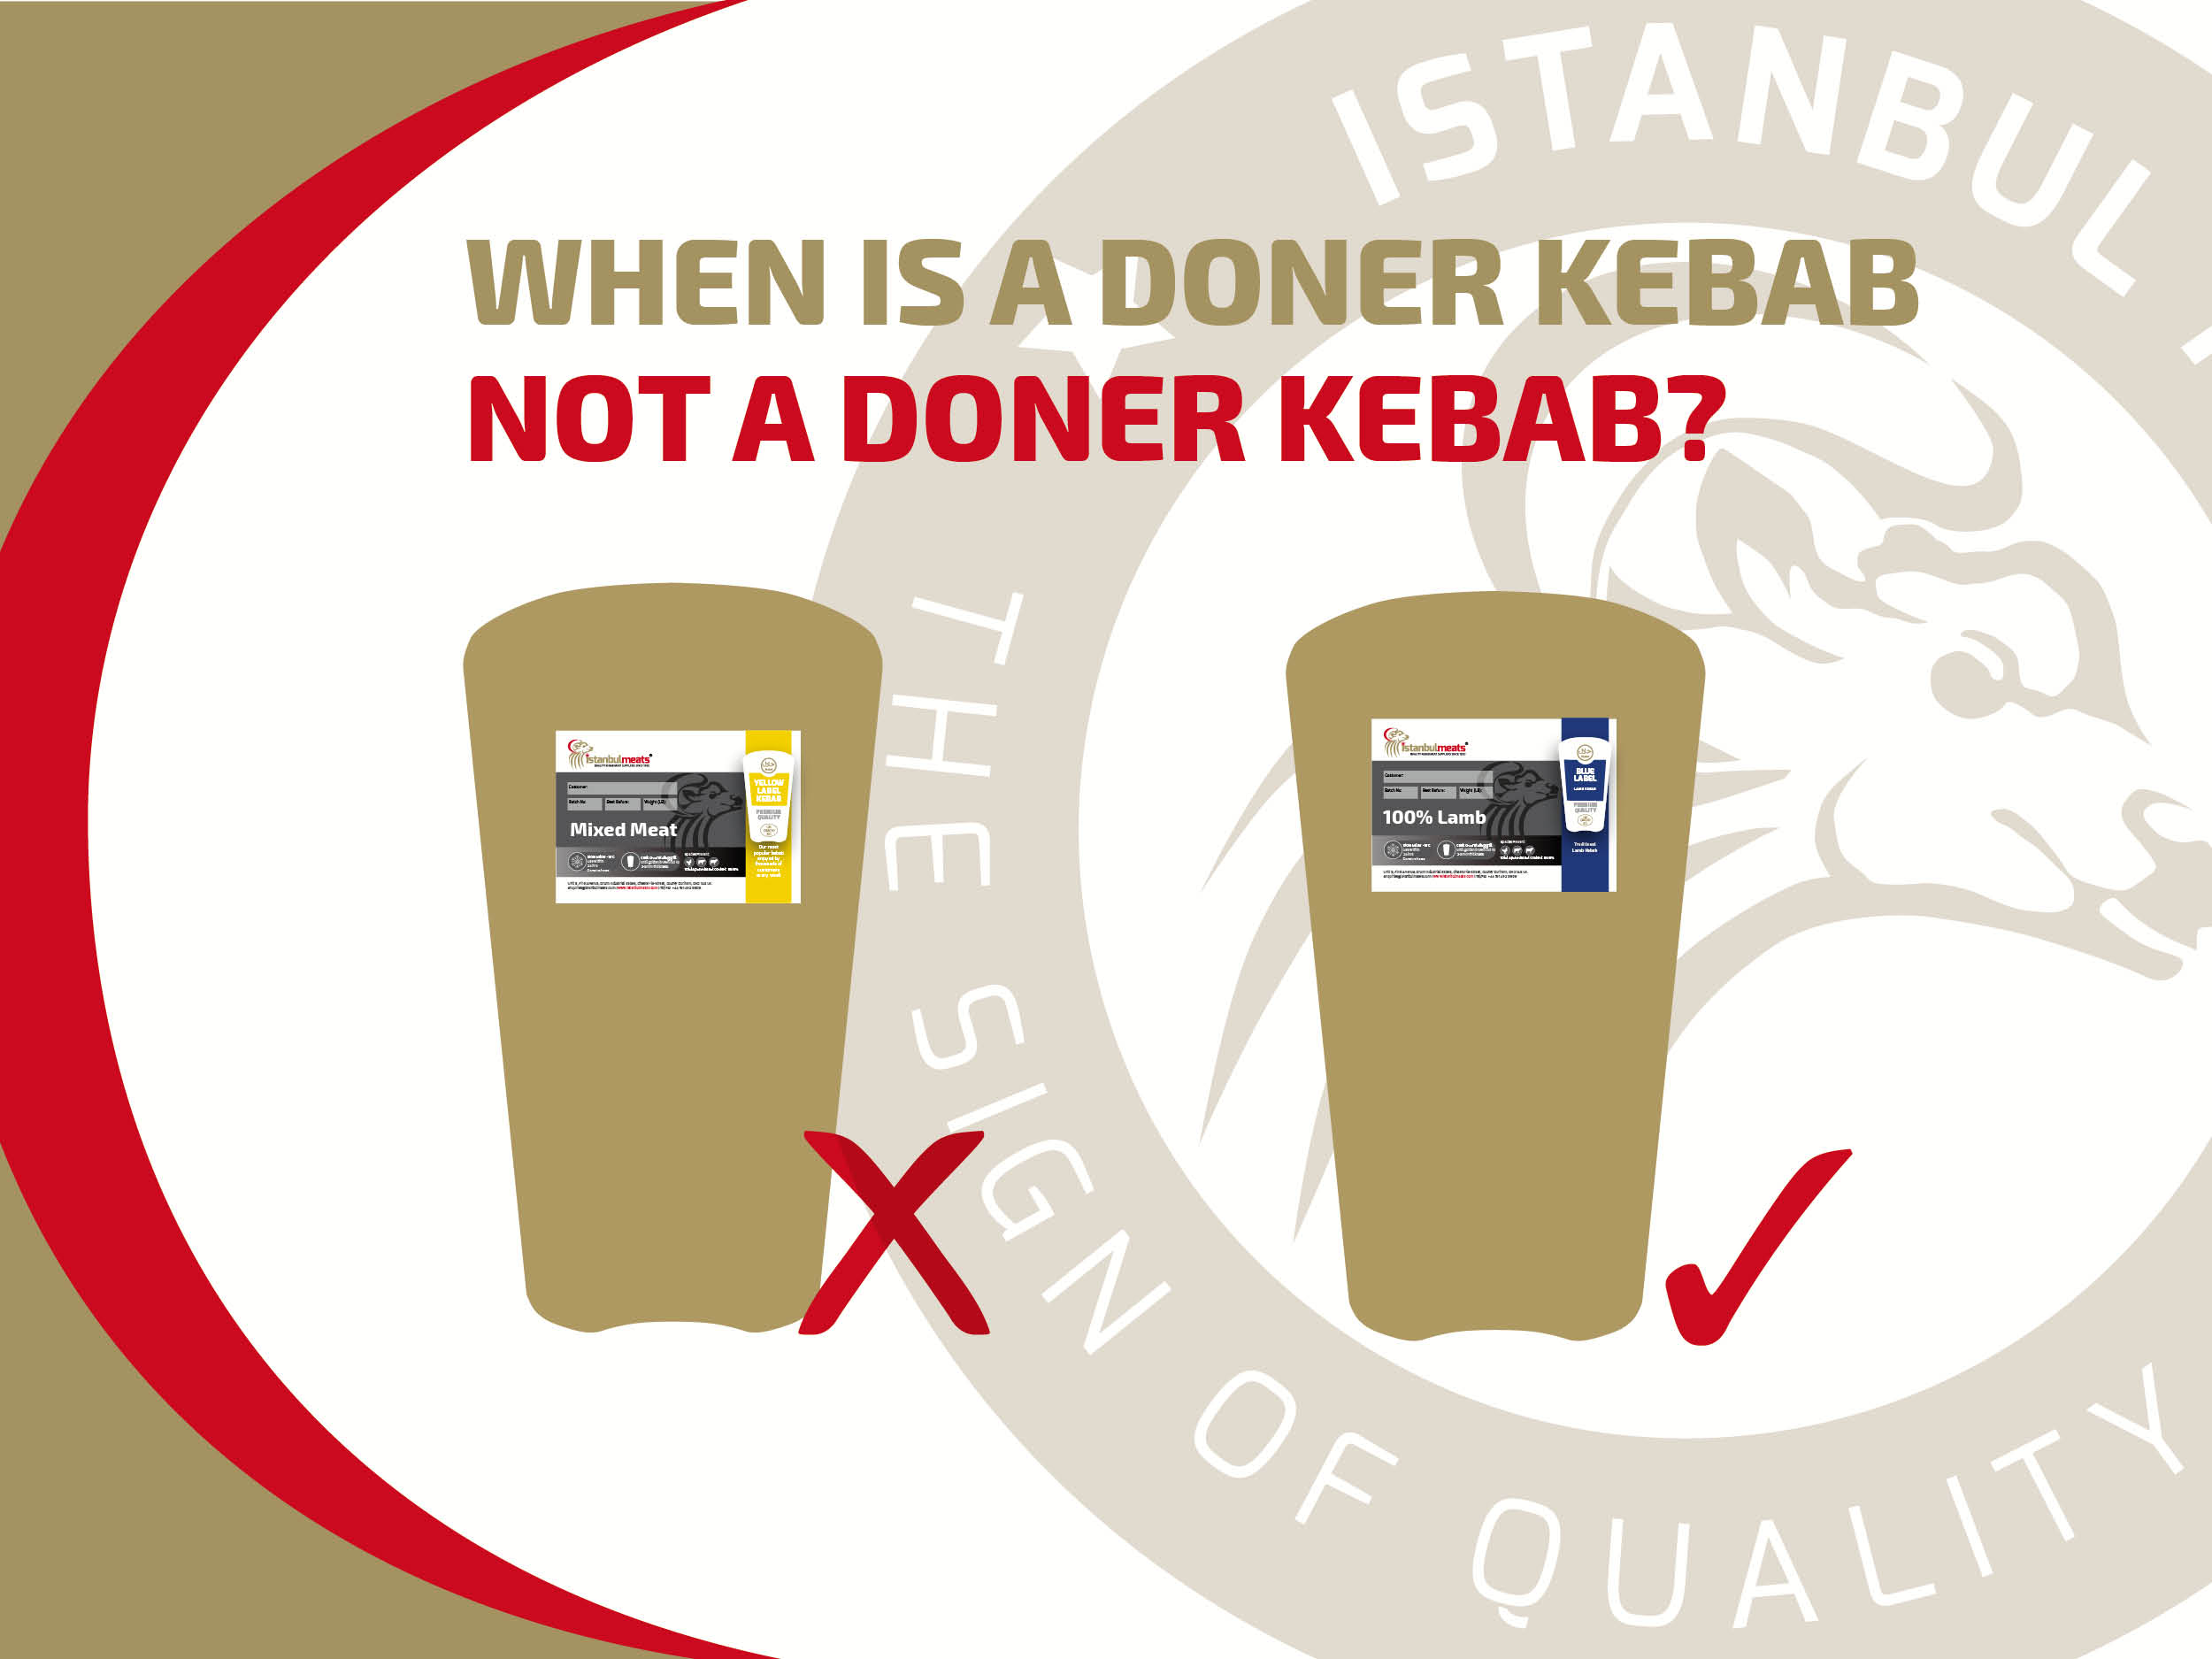 Definition & Meaning of Kebab